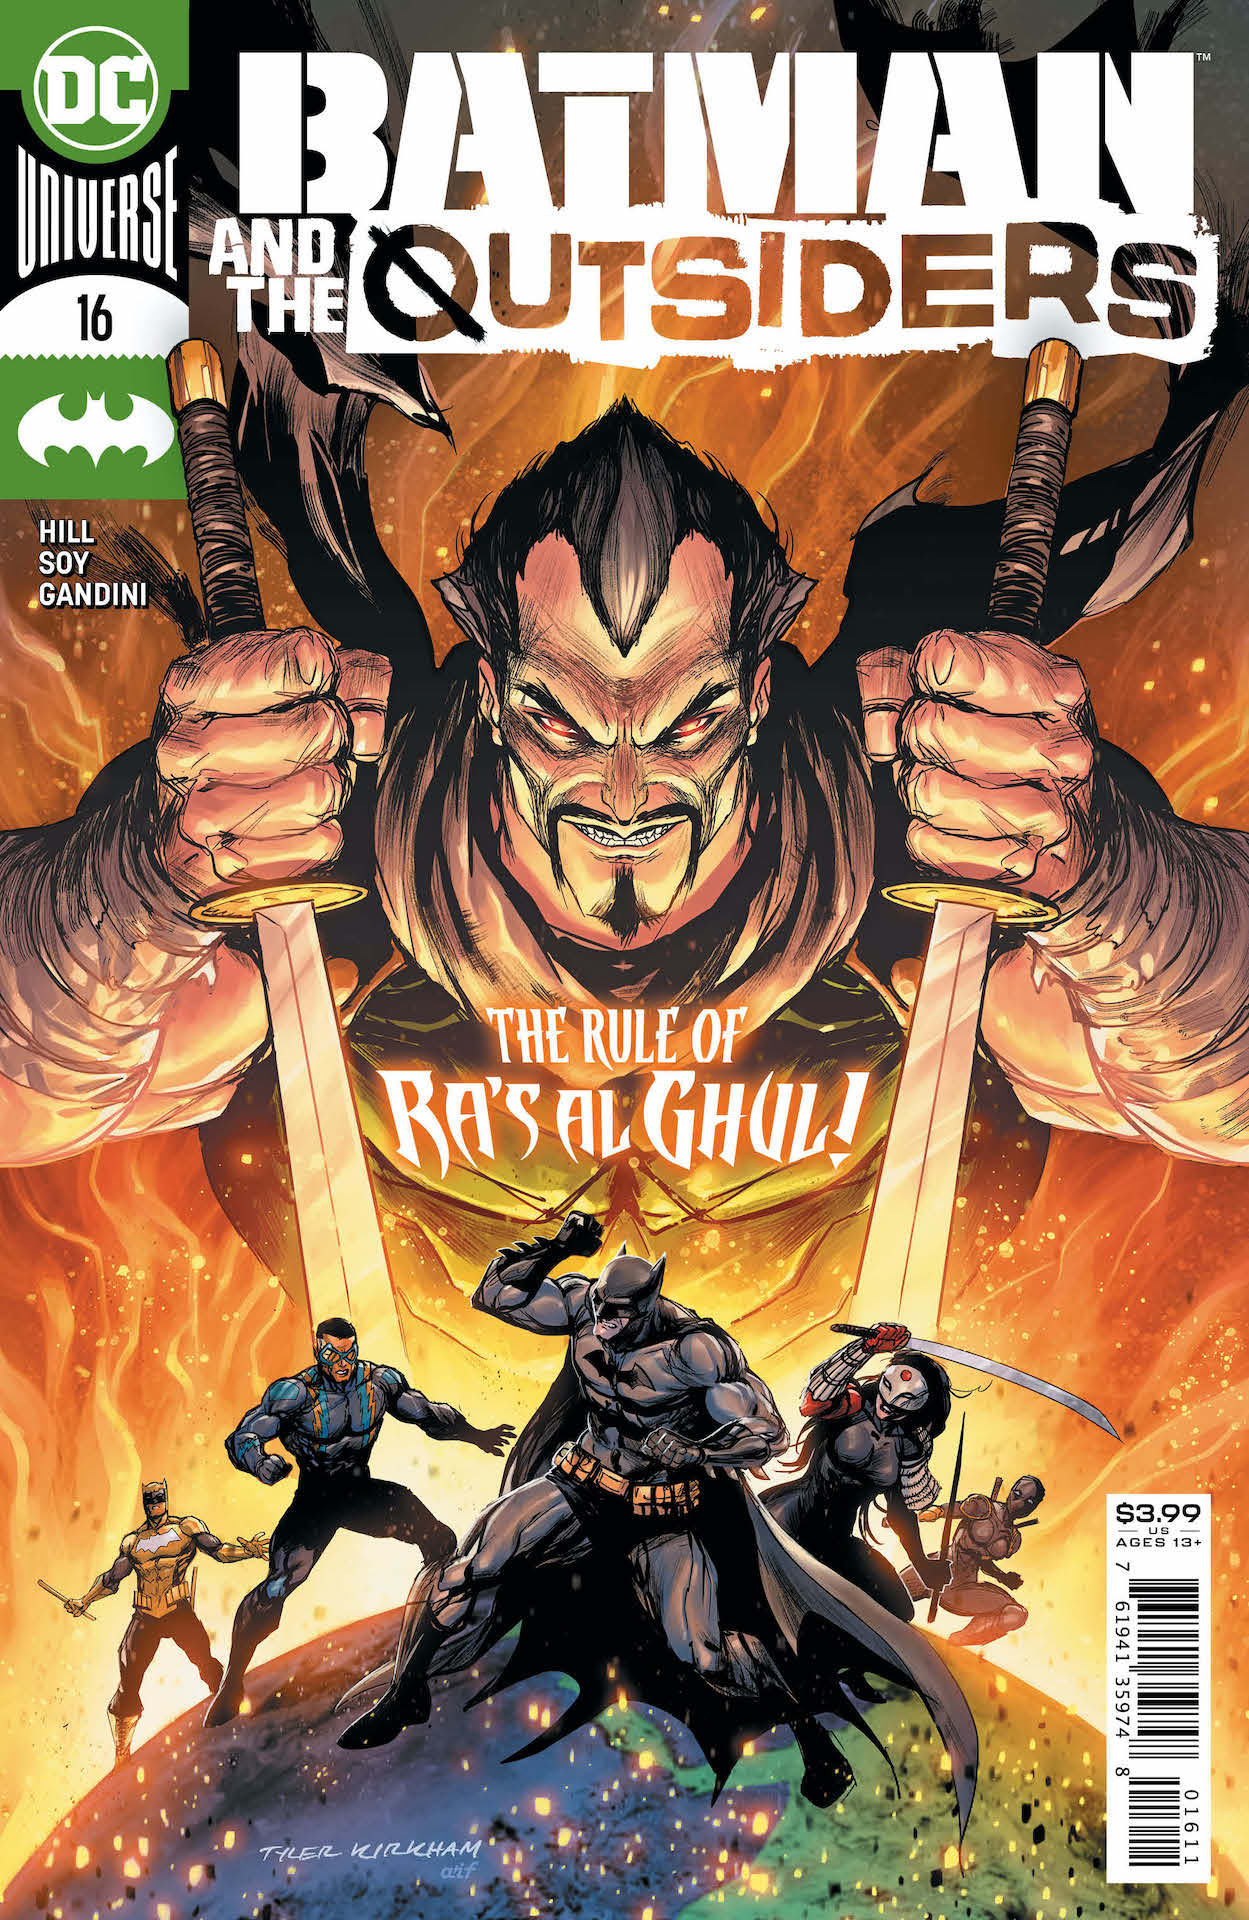 DC Preview: Batman and the Outsiders #16